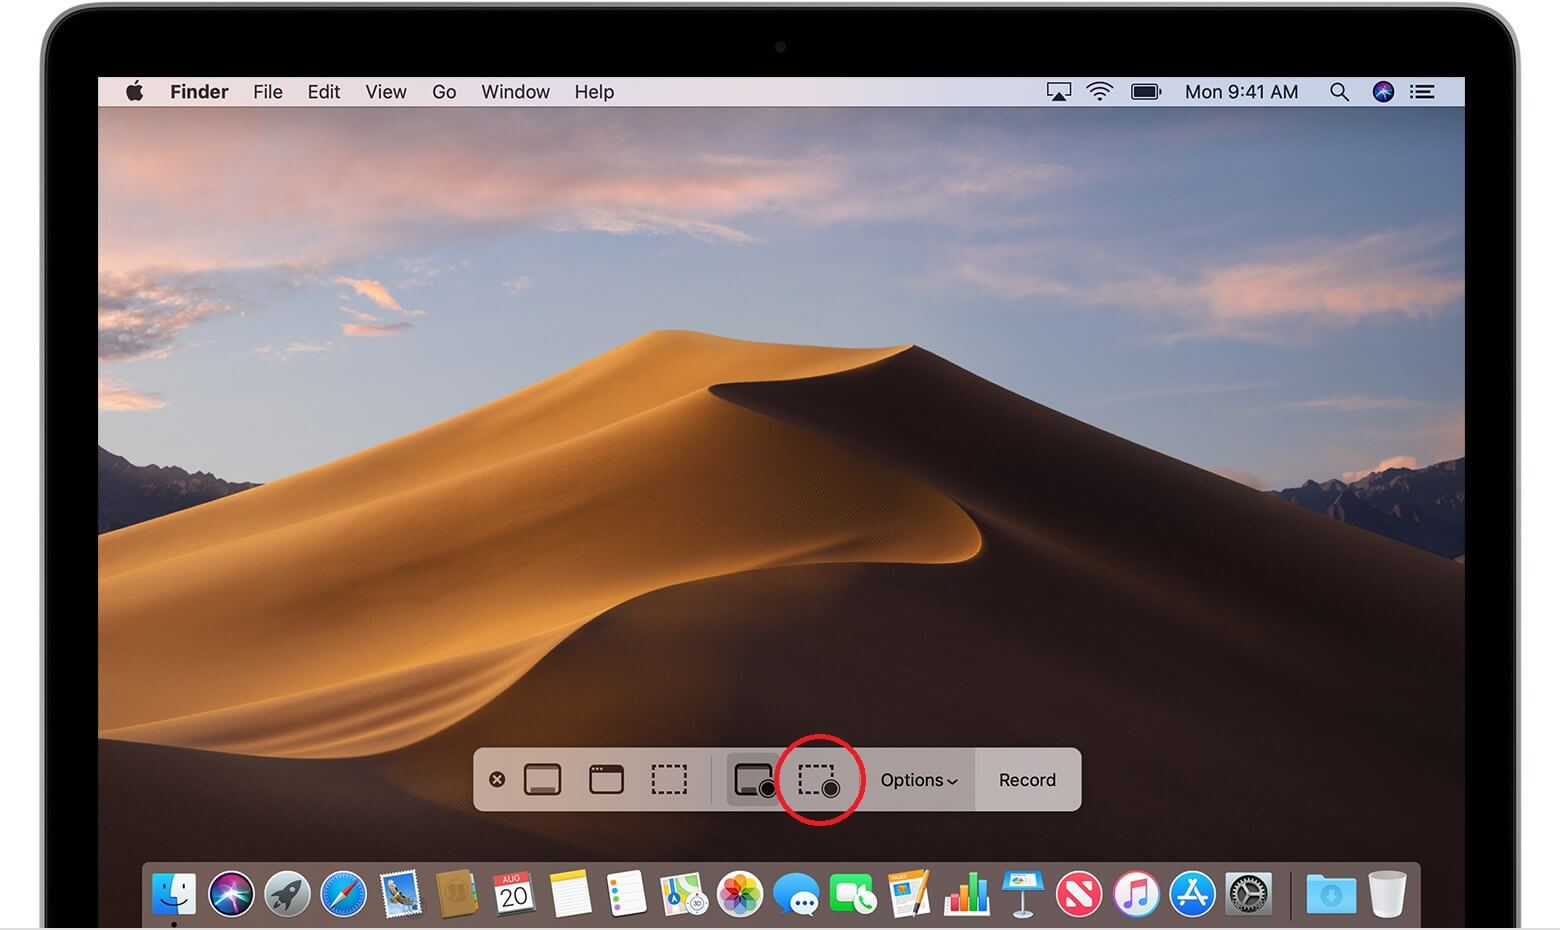 how to screen record on mac